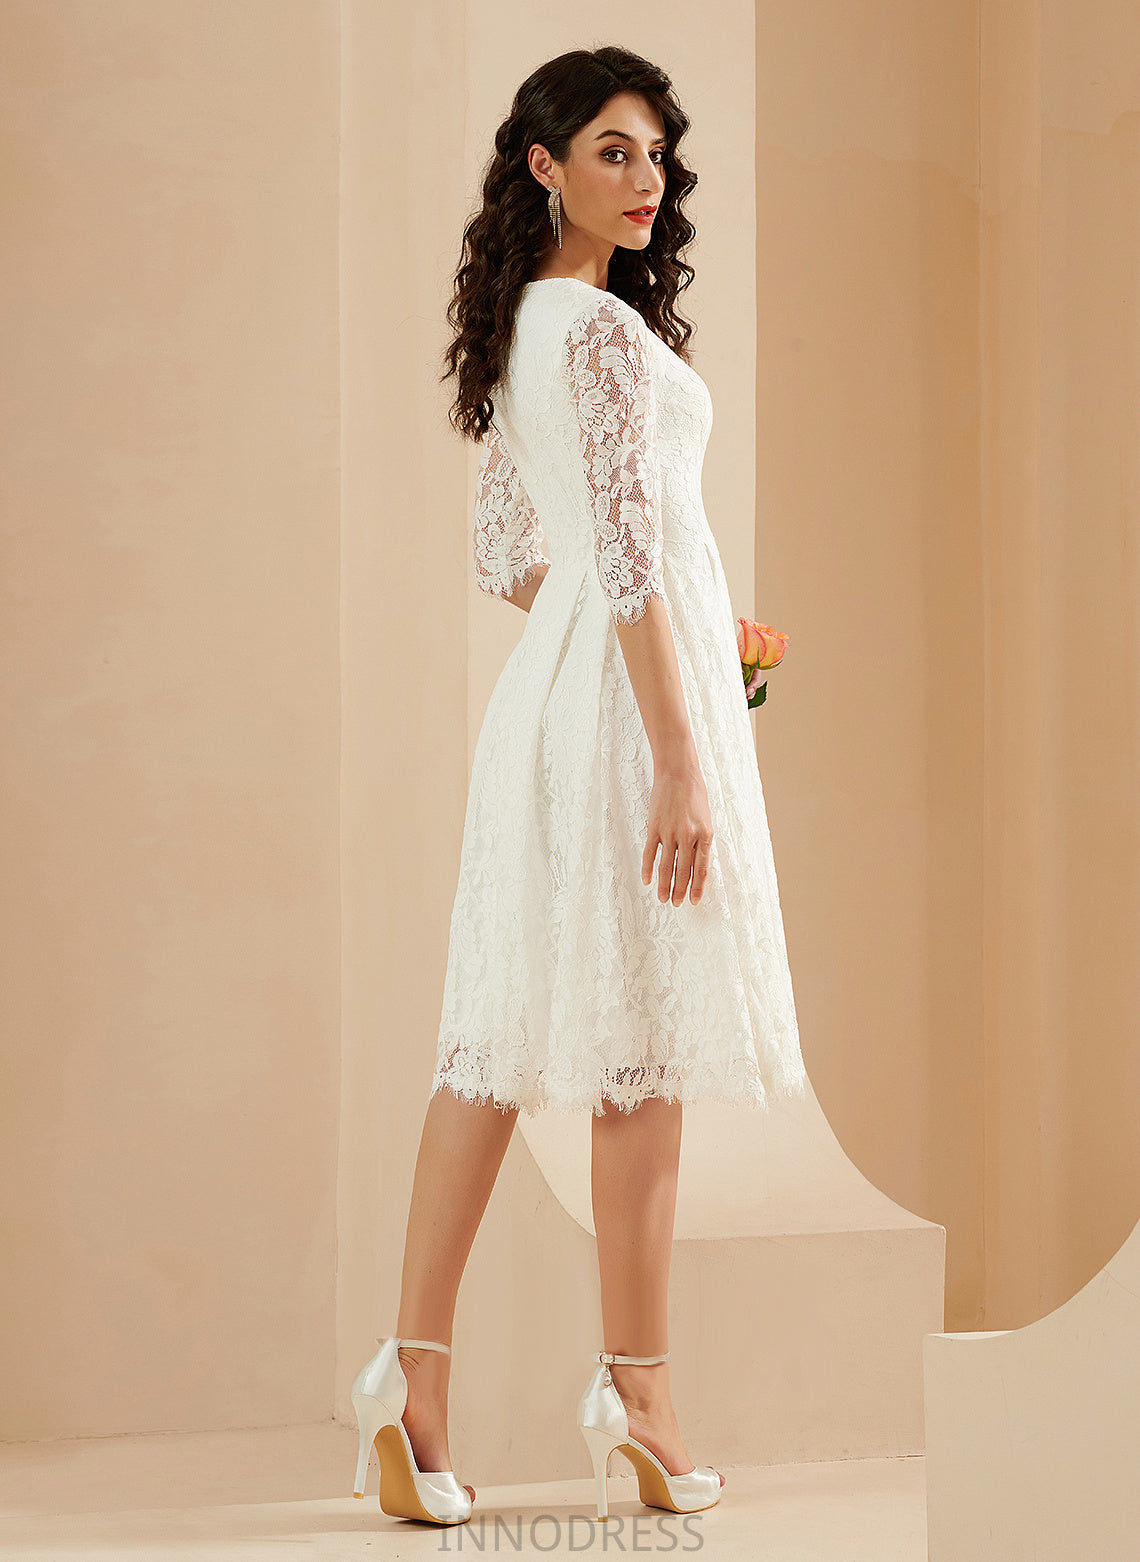 Lace Wedding Dresses Scoop Knee-Length Nathaly Dress A-Line Wedding